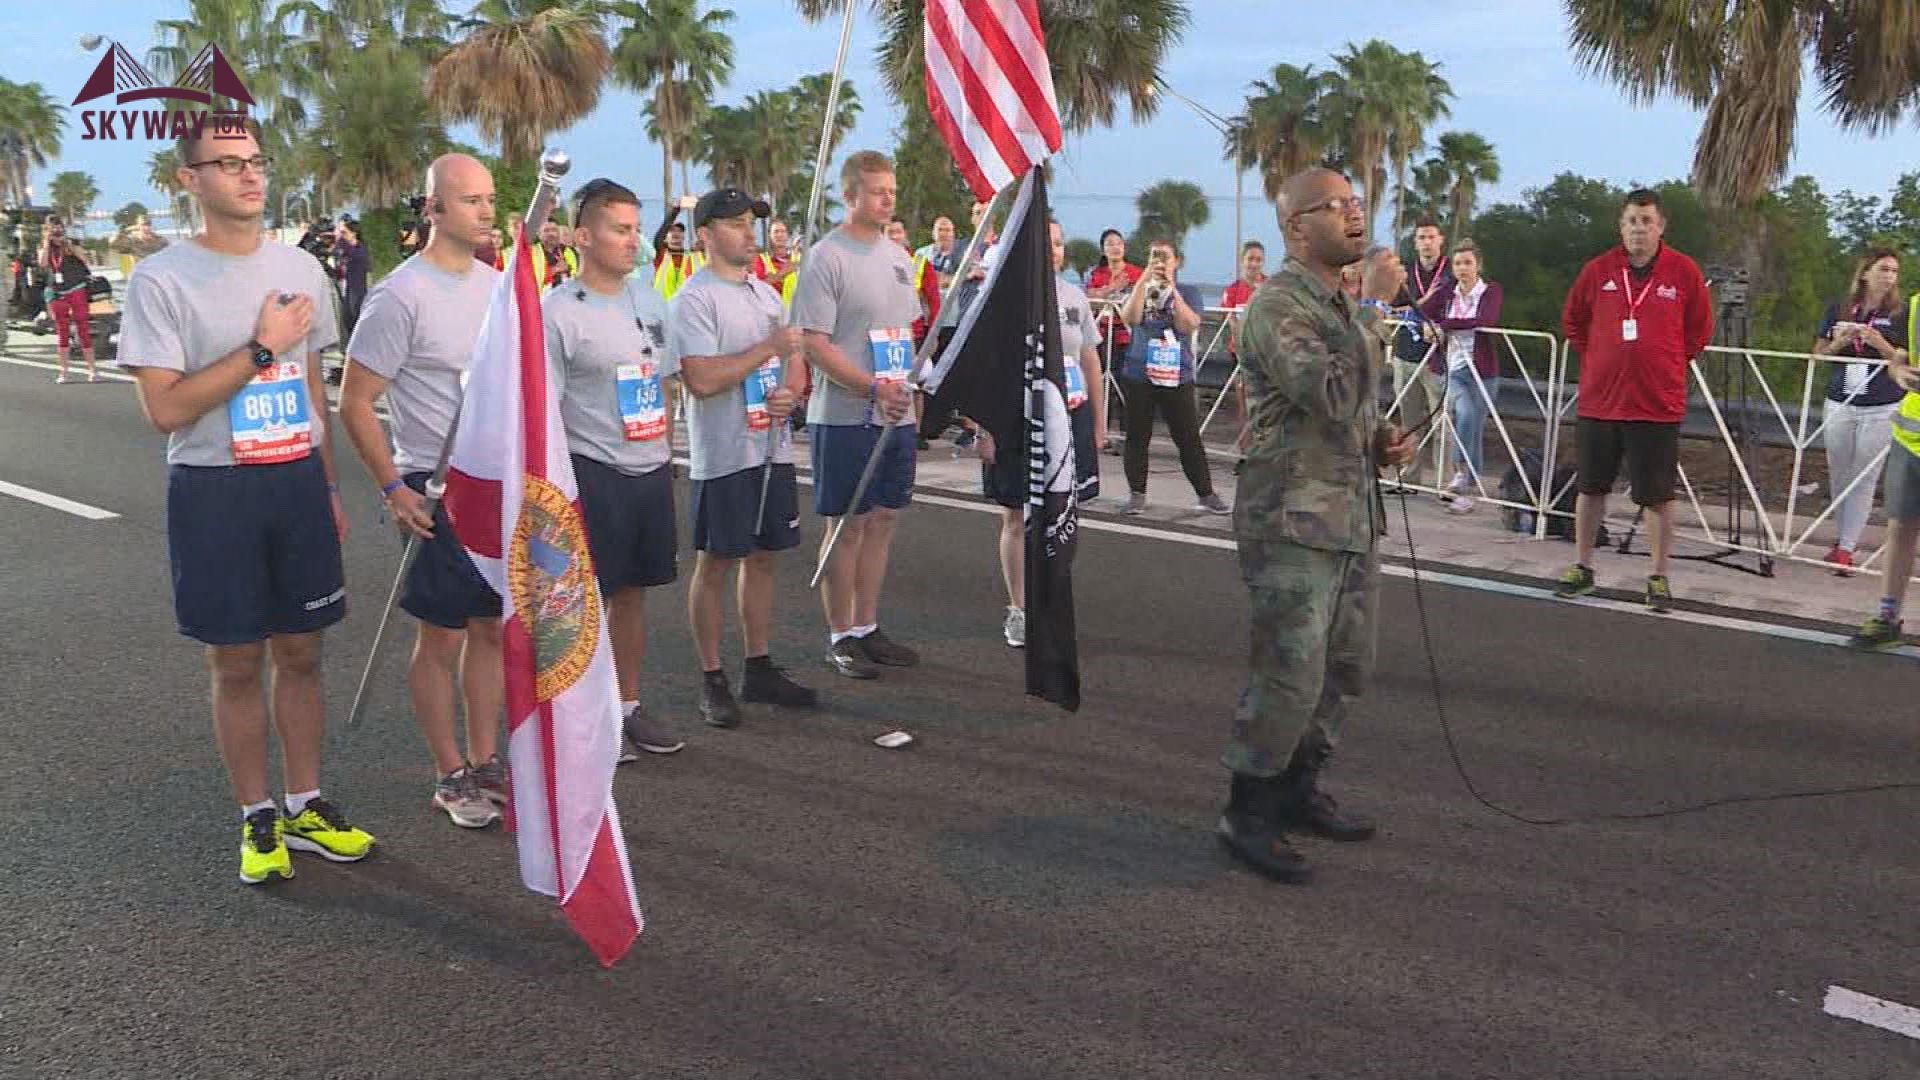 U.S. Army Veteran Specialist Charles Jones sang the National Anthem at the start of the 2019 Skyway 10K.